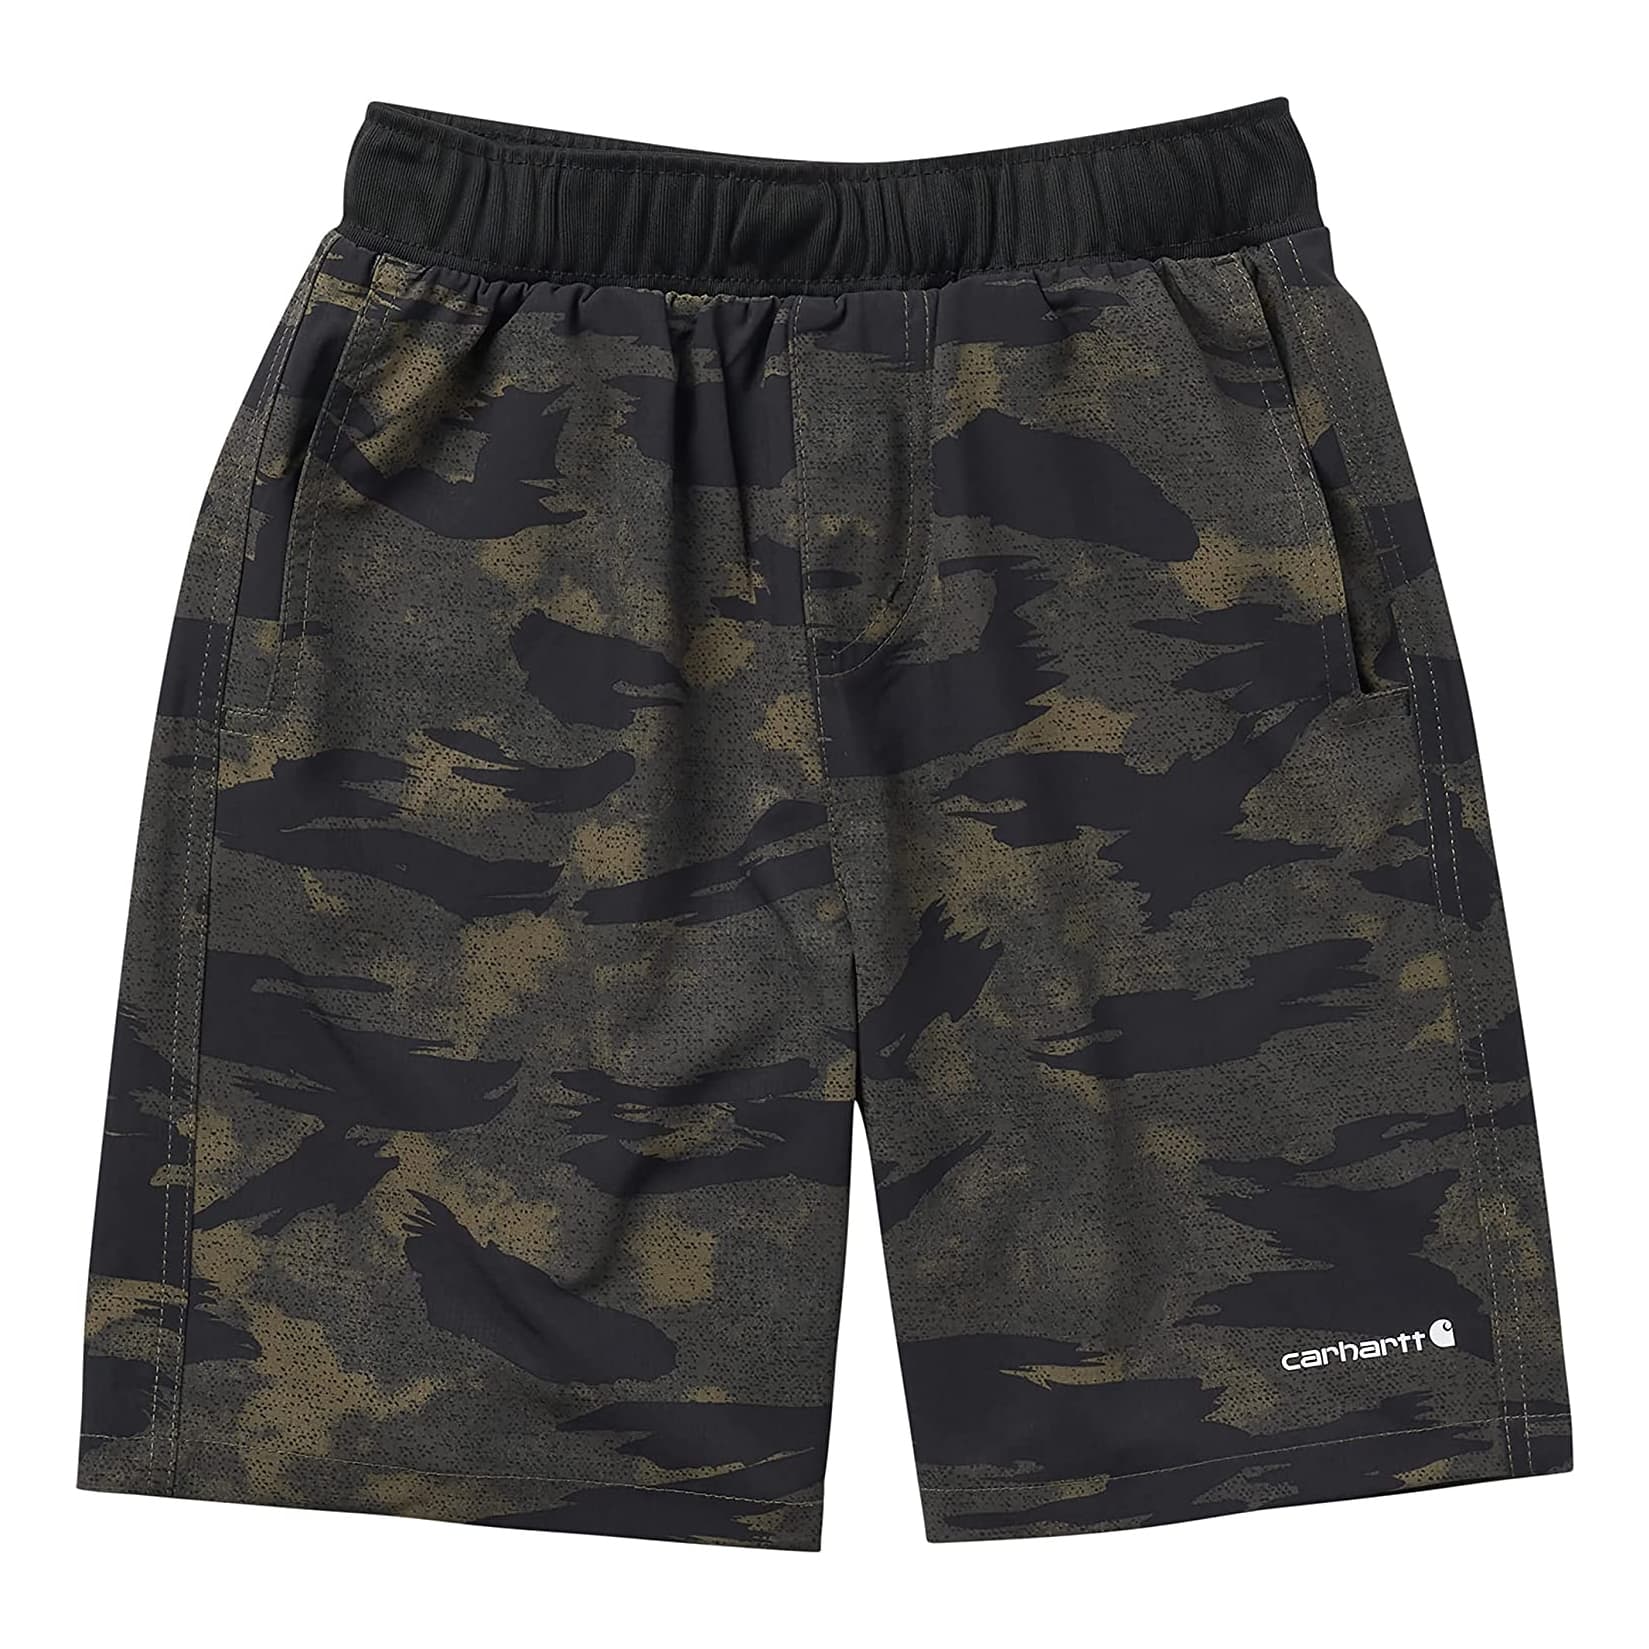 Carhartt® Infant/Toddler Boys’ Rugged Flex® Loose Fit Ripstop Camo Work Shorts - Green Blind Fatigue Camo